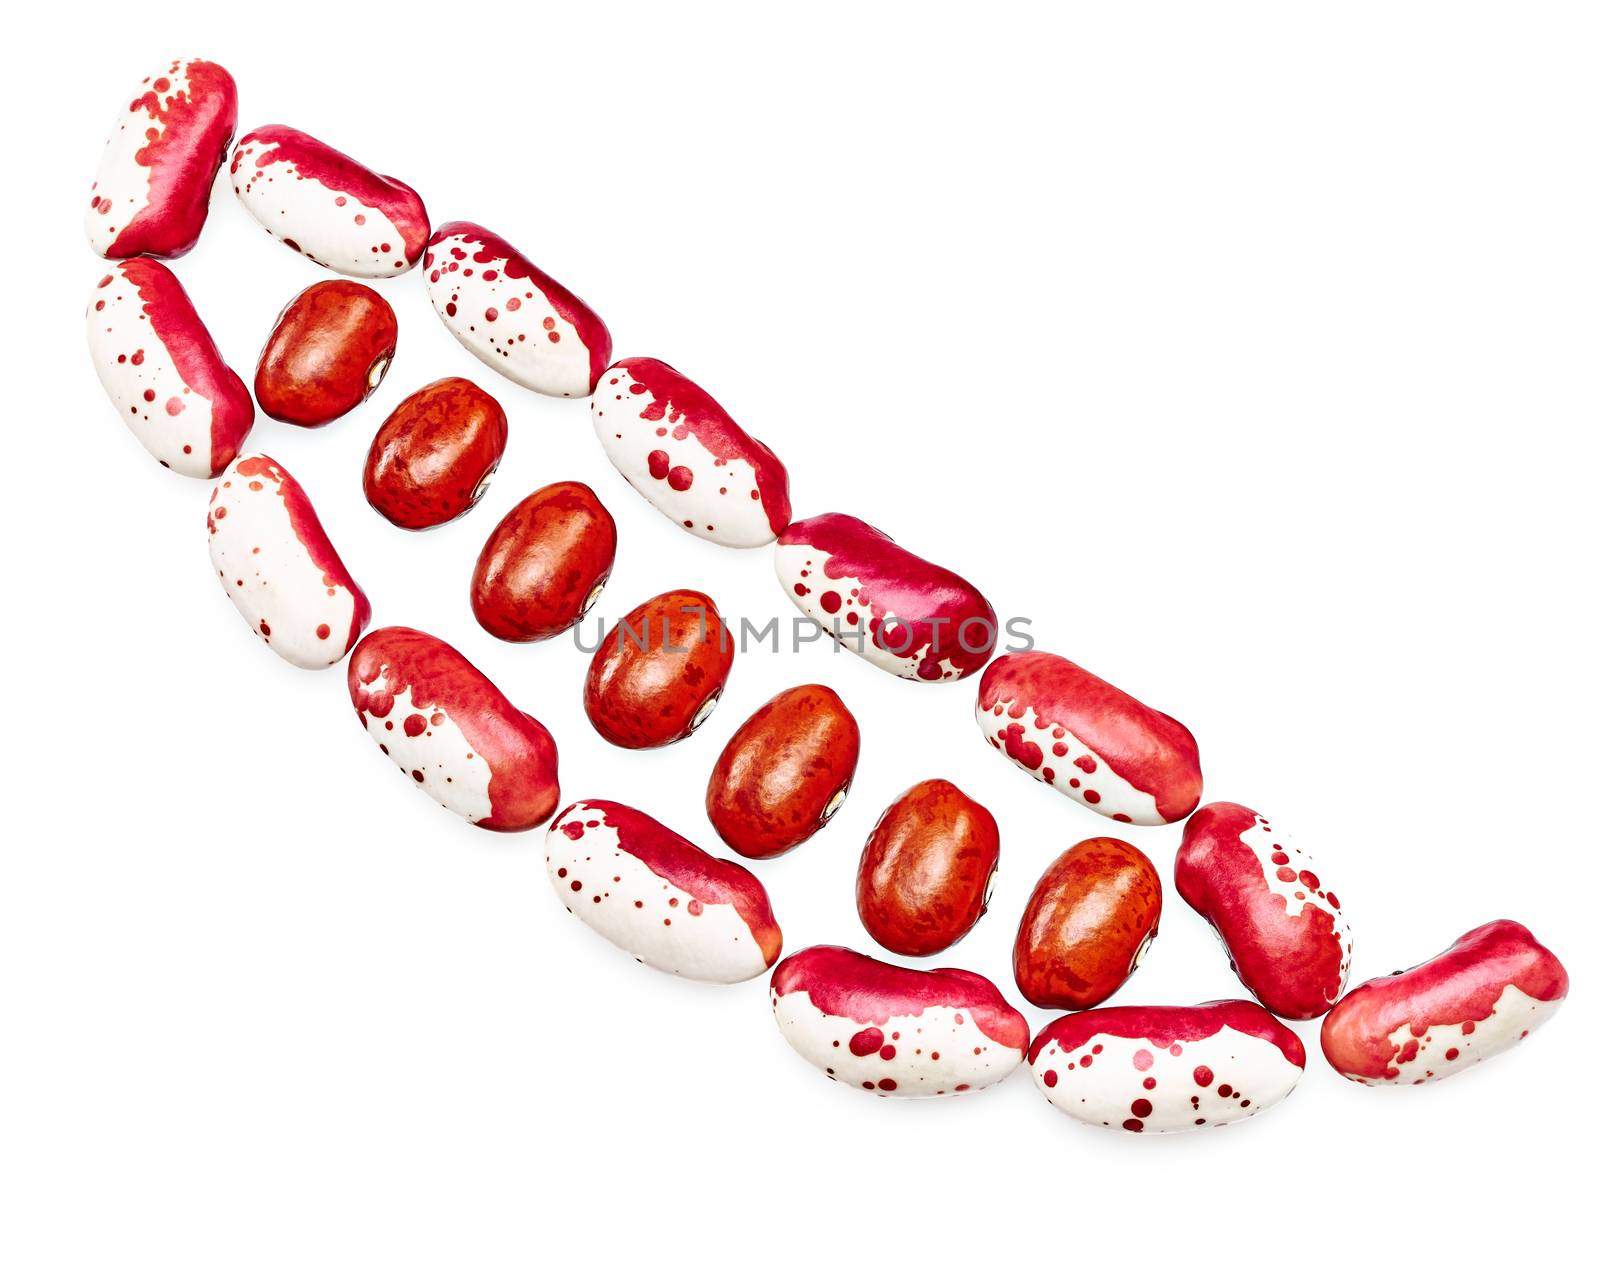 Colored Haricot in pod form, mix of beans, legumes on white background.  Food closeup